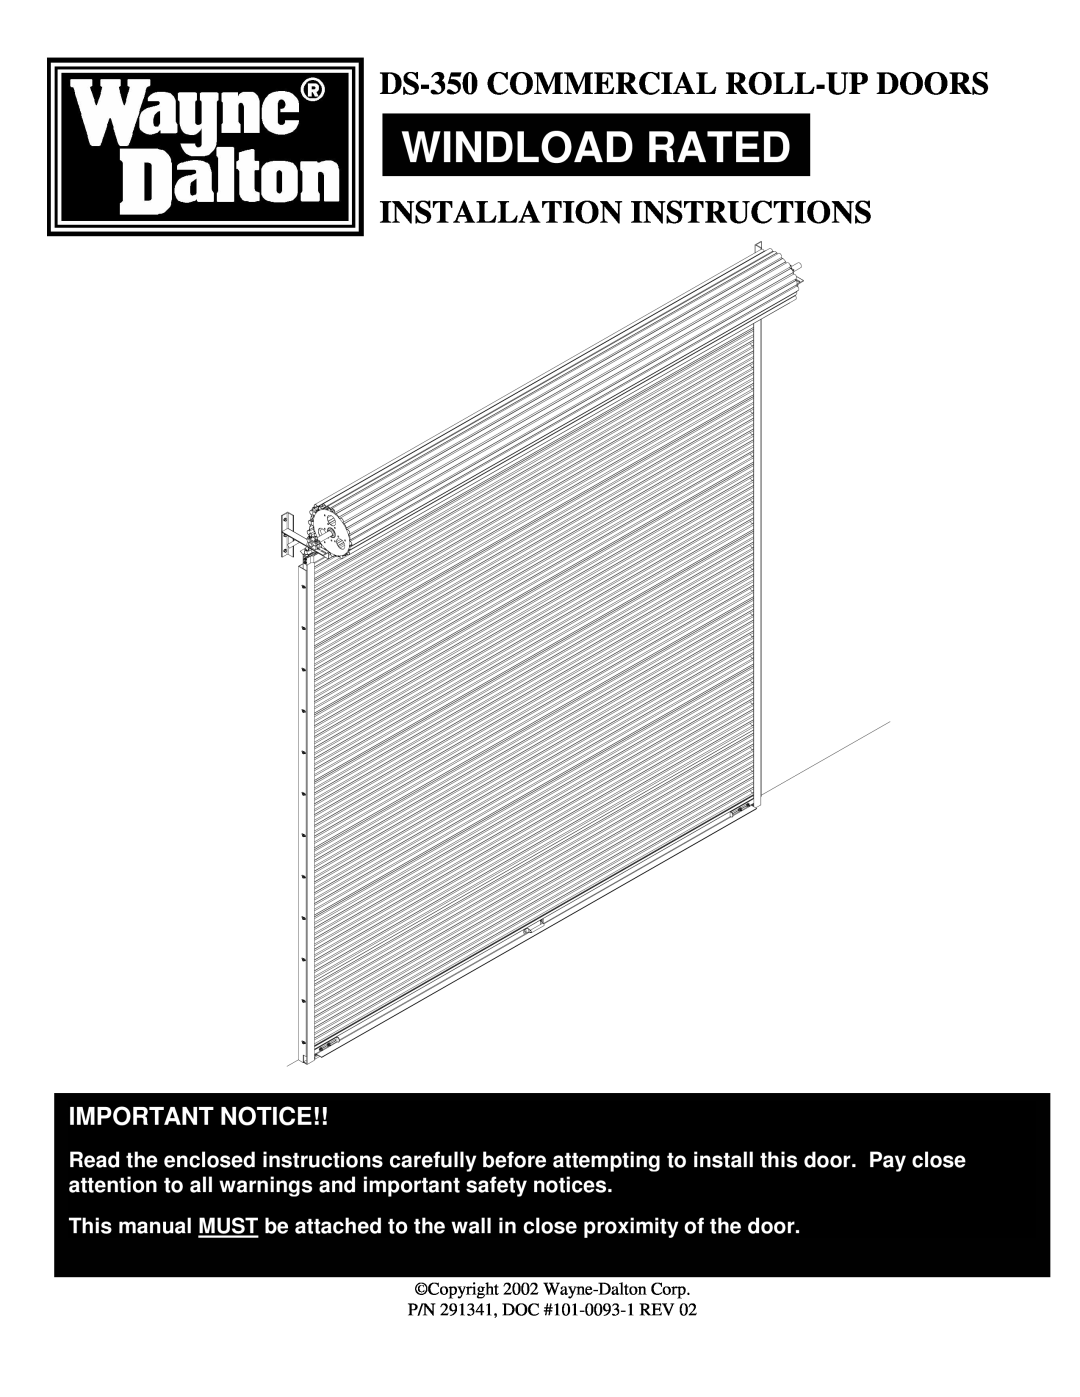 Wayne-Dalton installation instructions Notice Of Changes To Installation, DS-200& DS-350ROLLUP STEEL DOORS 